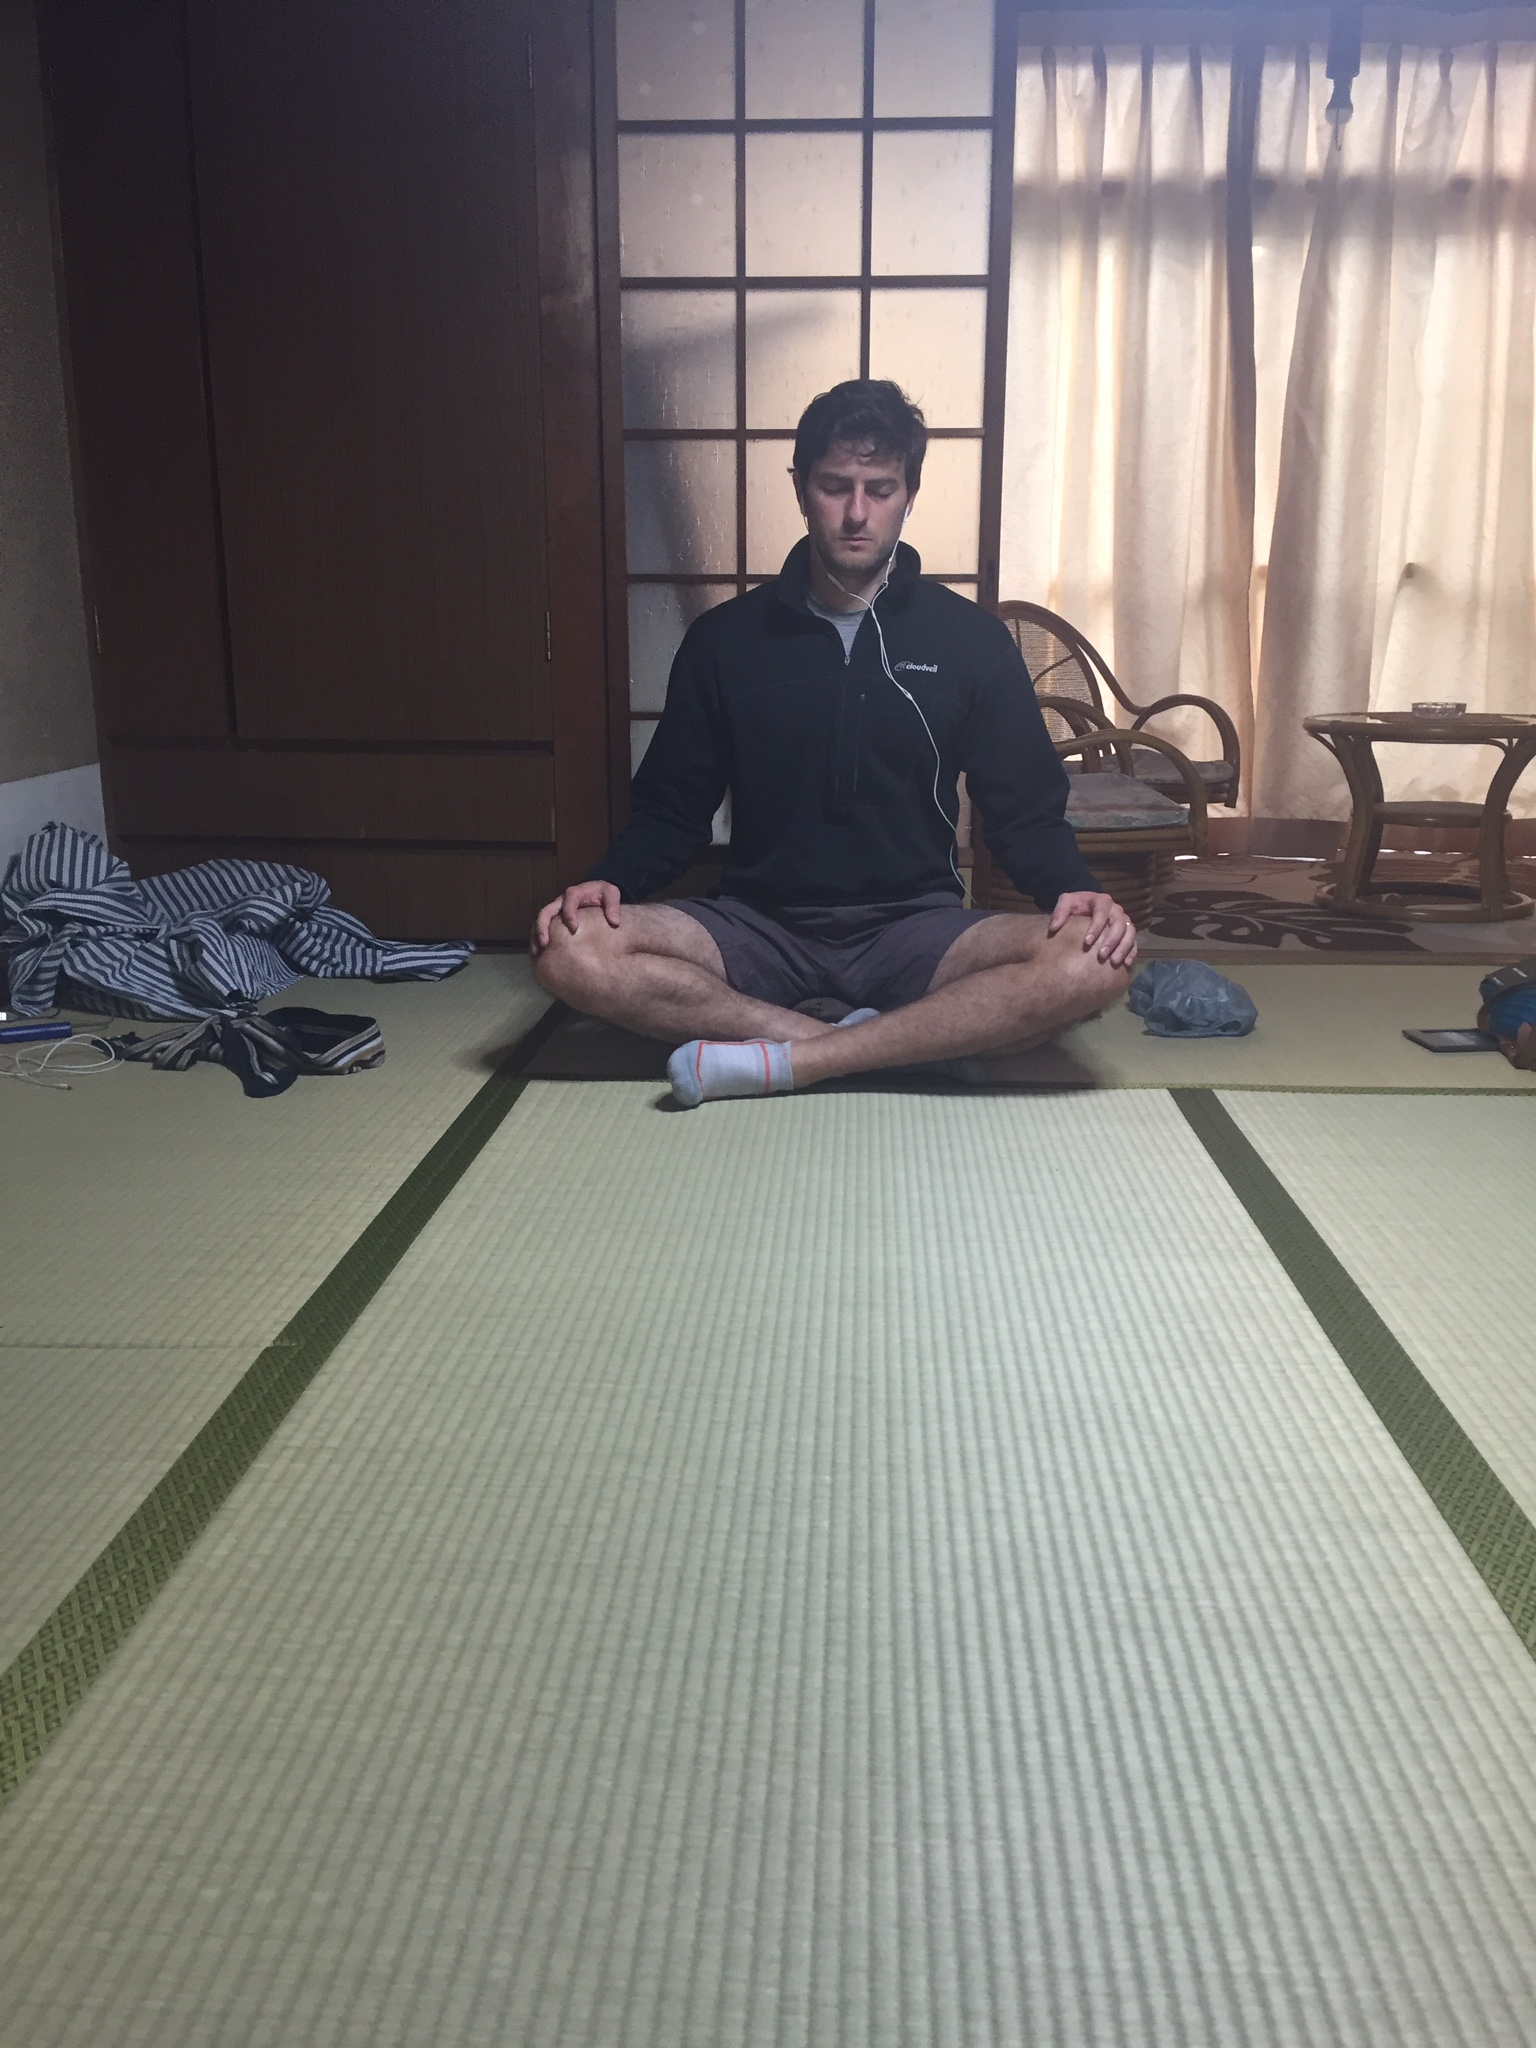 Meditation is hard when you can barely cross your legs